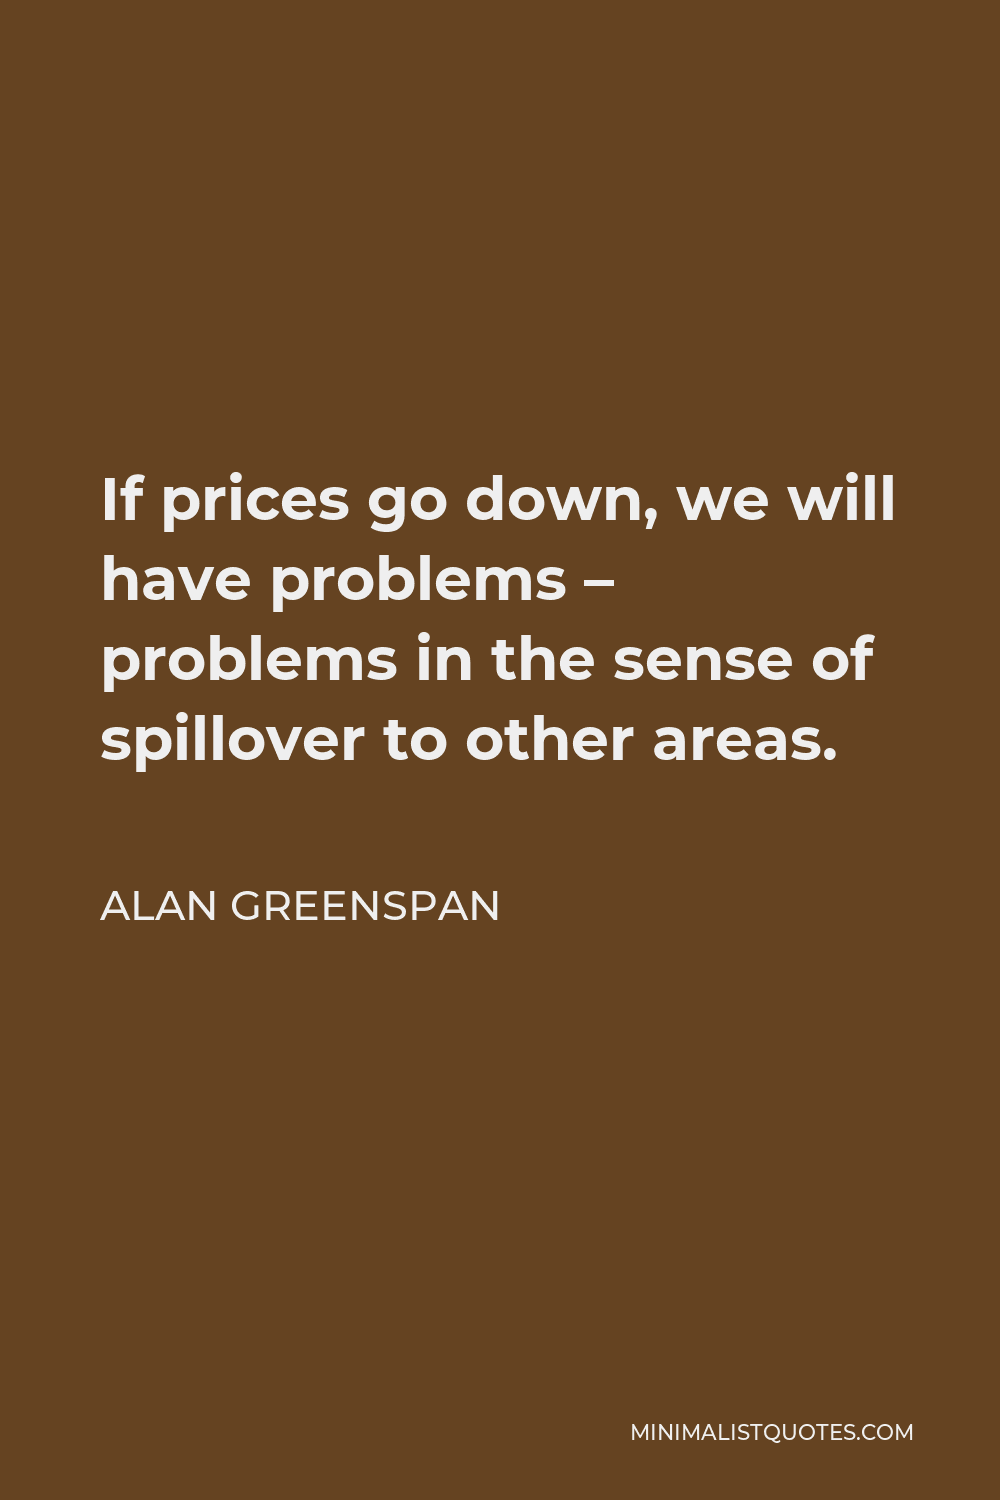 Alan Greenspan Quote - If prices go down, we will have problems – problems in the sense of spillover to other areas.